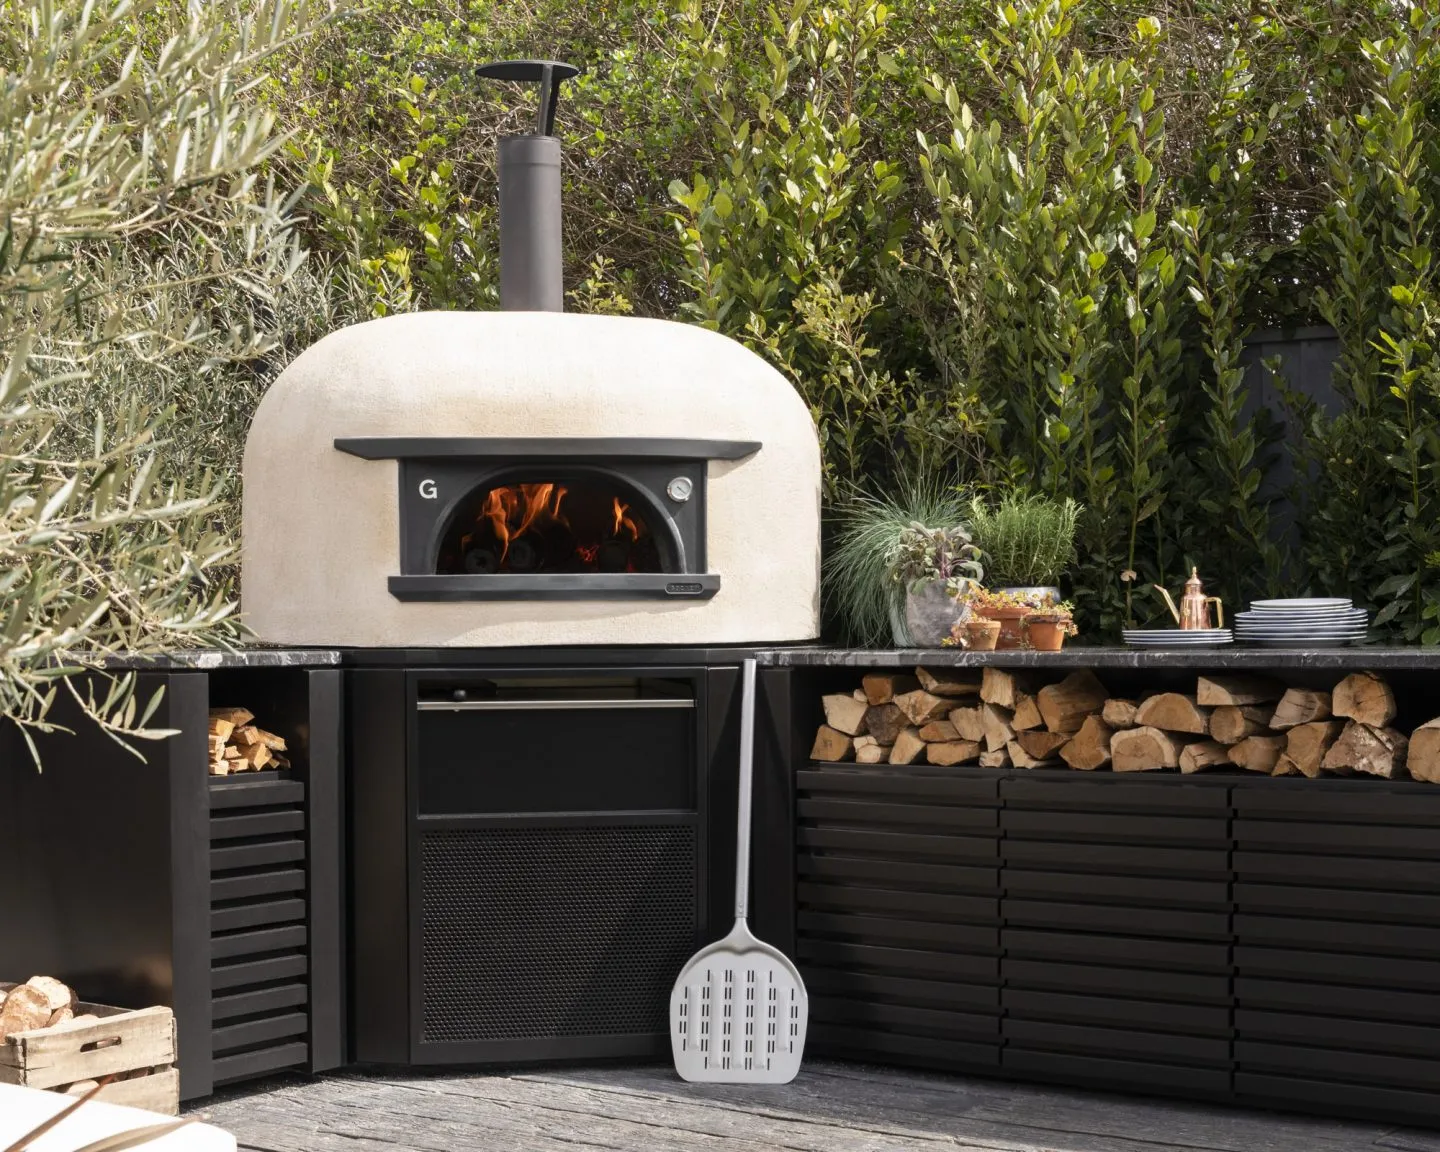 The Perfect Outdoor Pizza Oven - Emily May Interior Design